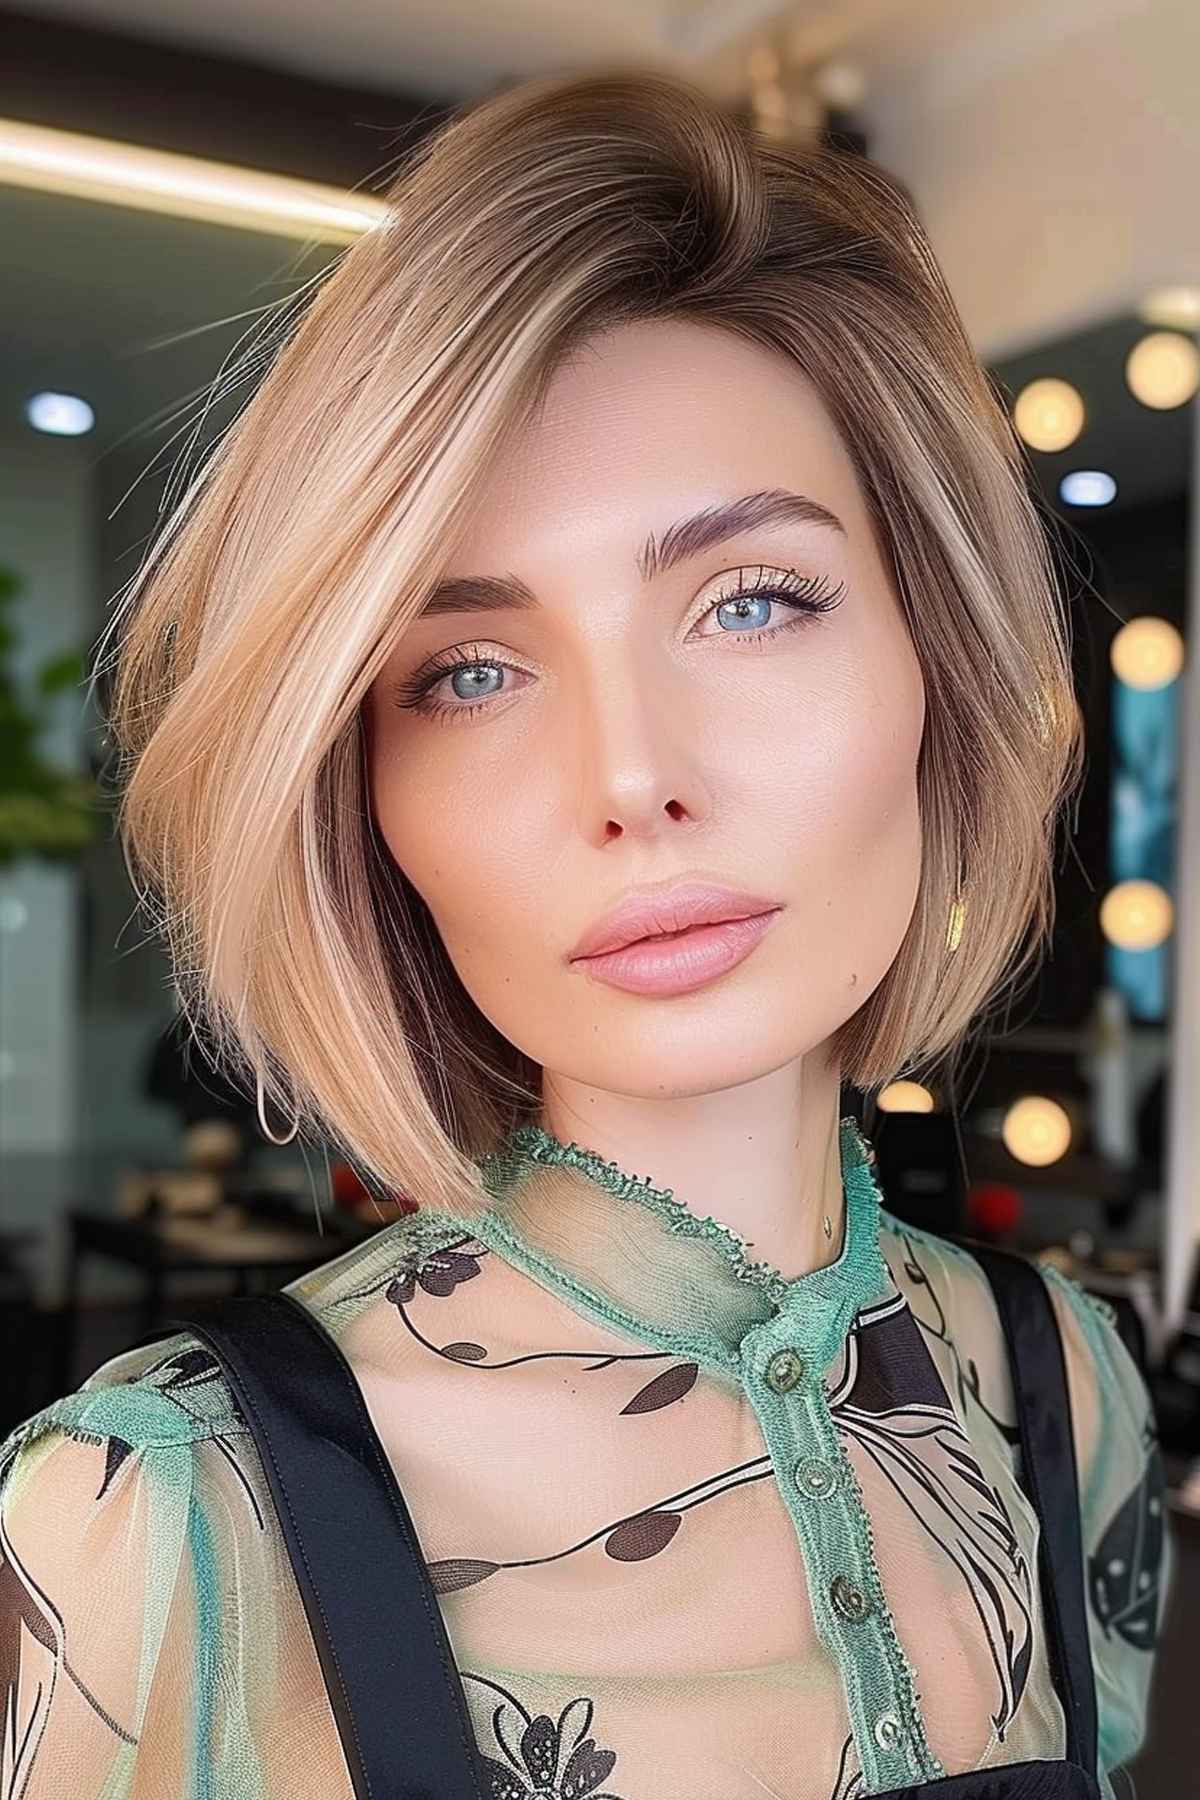 Smashing short blunt cut bob with a deep side part and blonde highlights